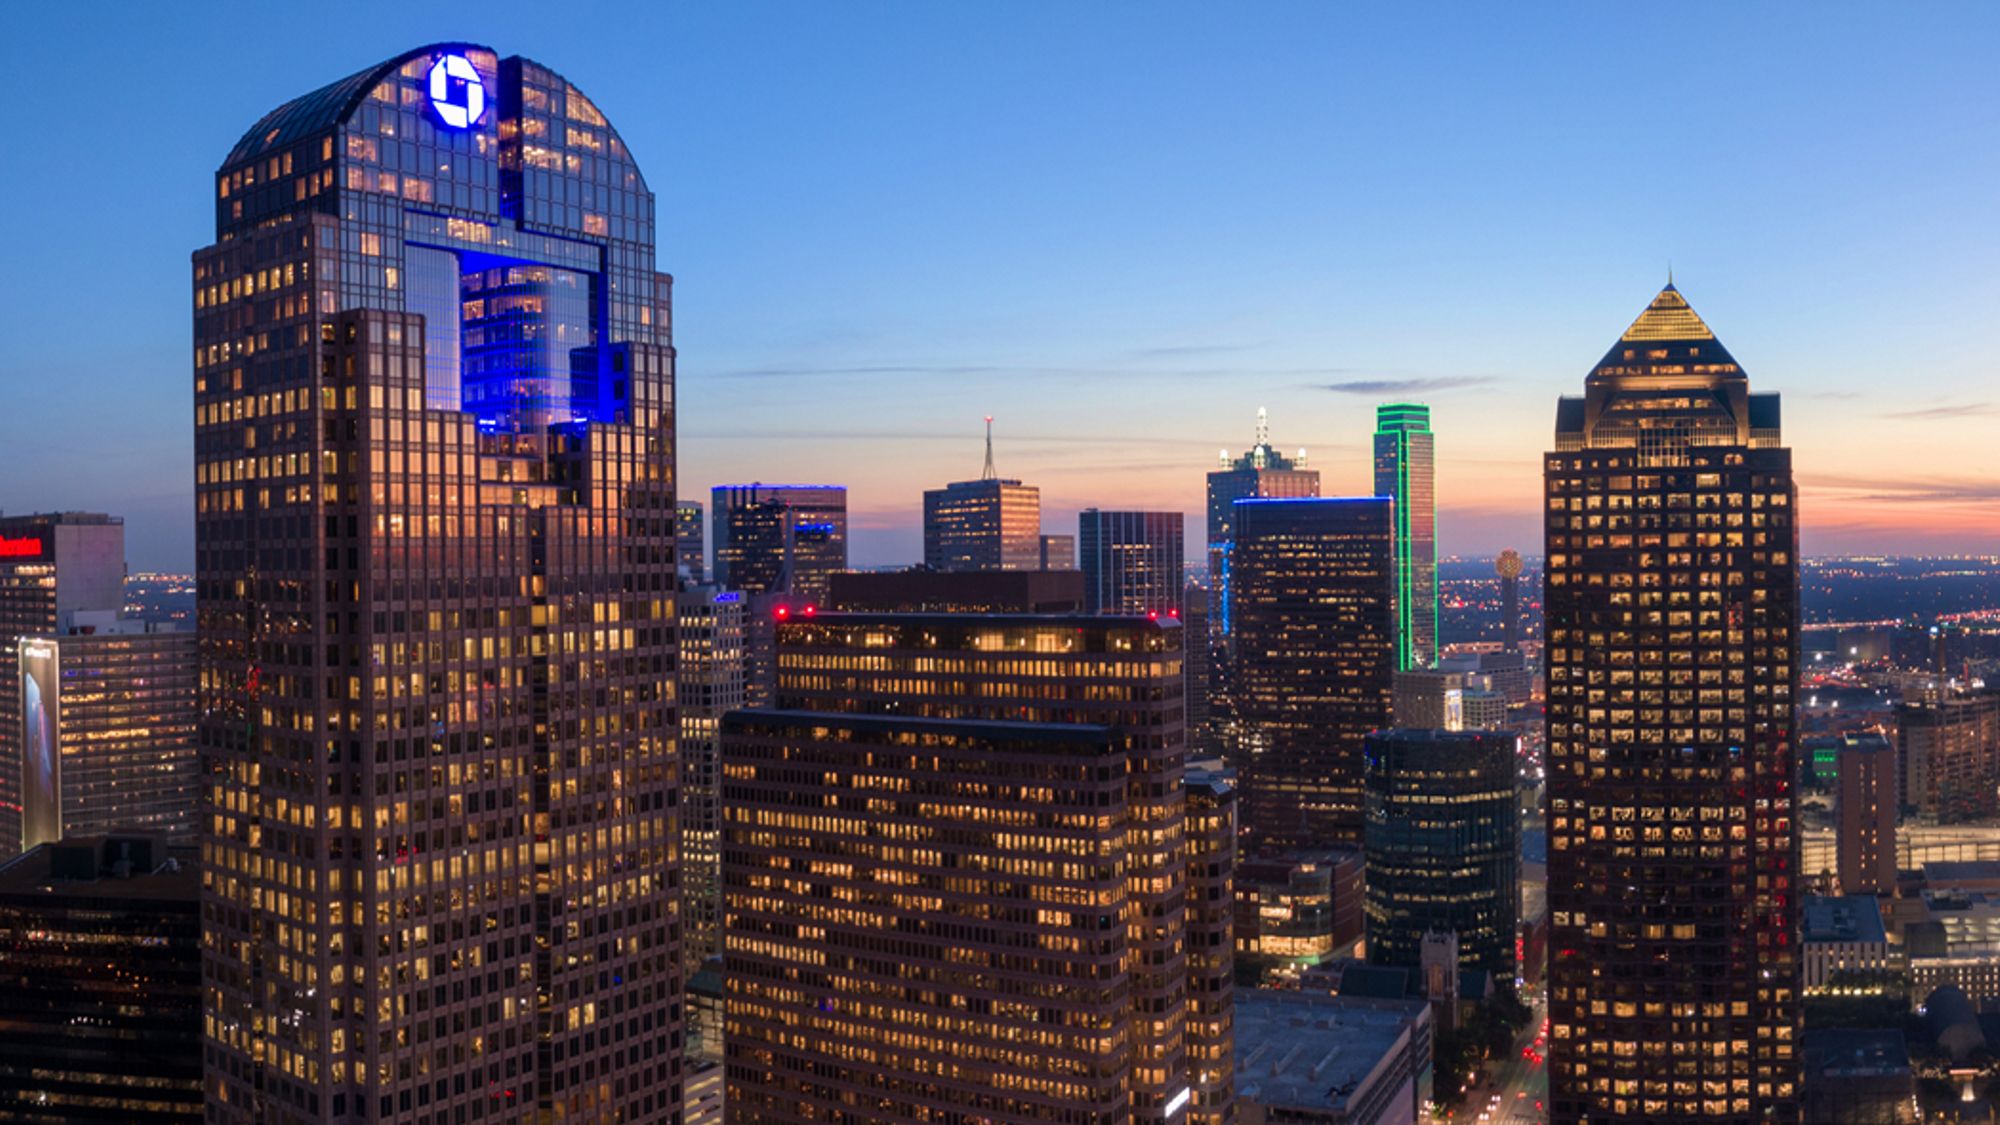 City view of Dallas in the evening.